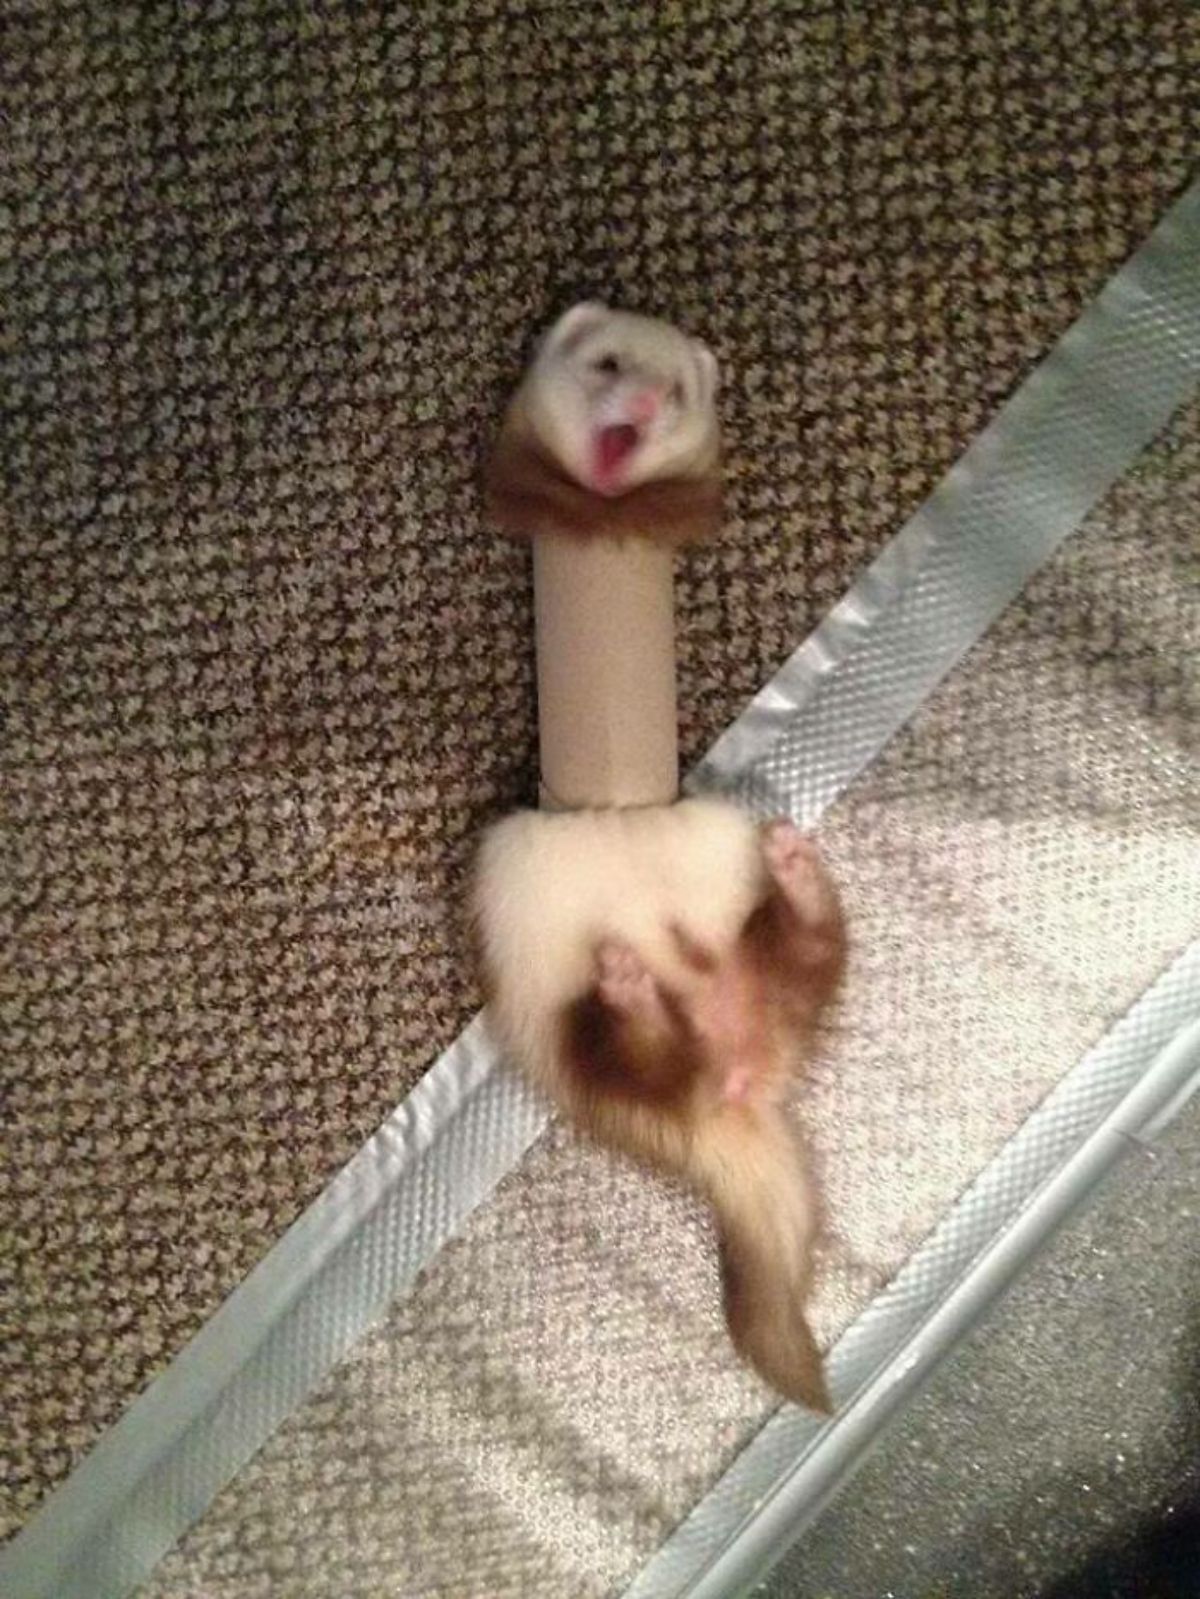 brown and white ferret stuck inside a toilet paper roll with the head and butt sticking out from either side